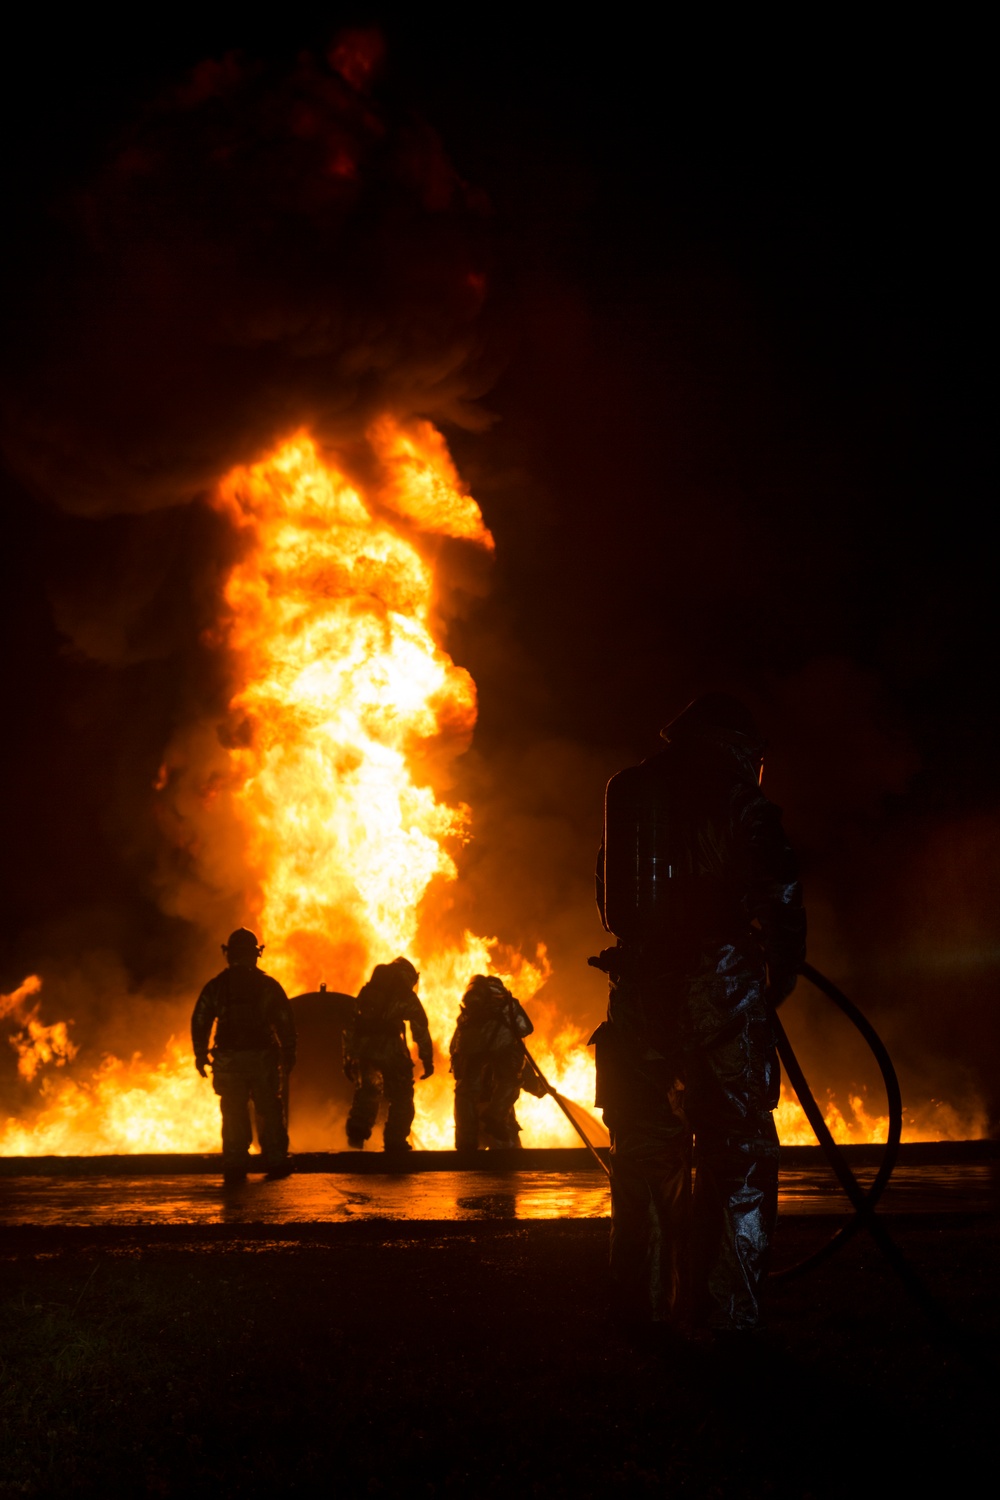 On fire for training: Aircraft Rescue Fire Fighting Marines sharpen skills on Marine Corps Air Station Futenma